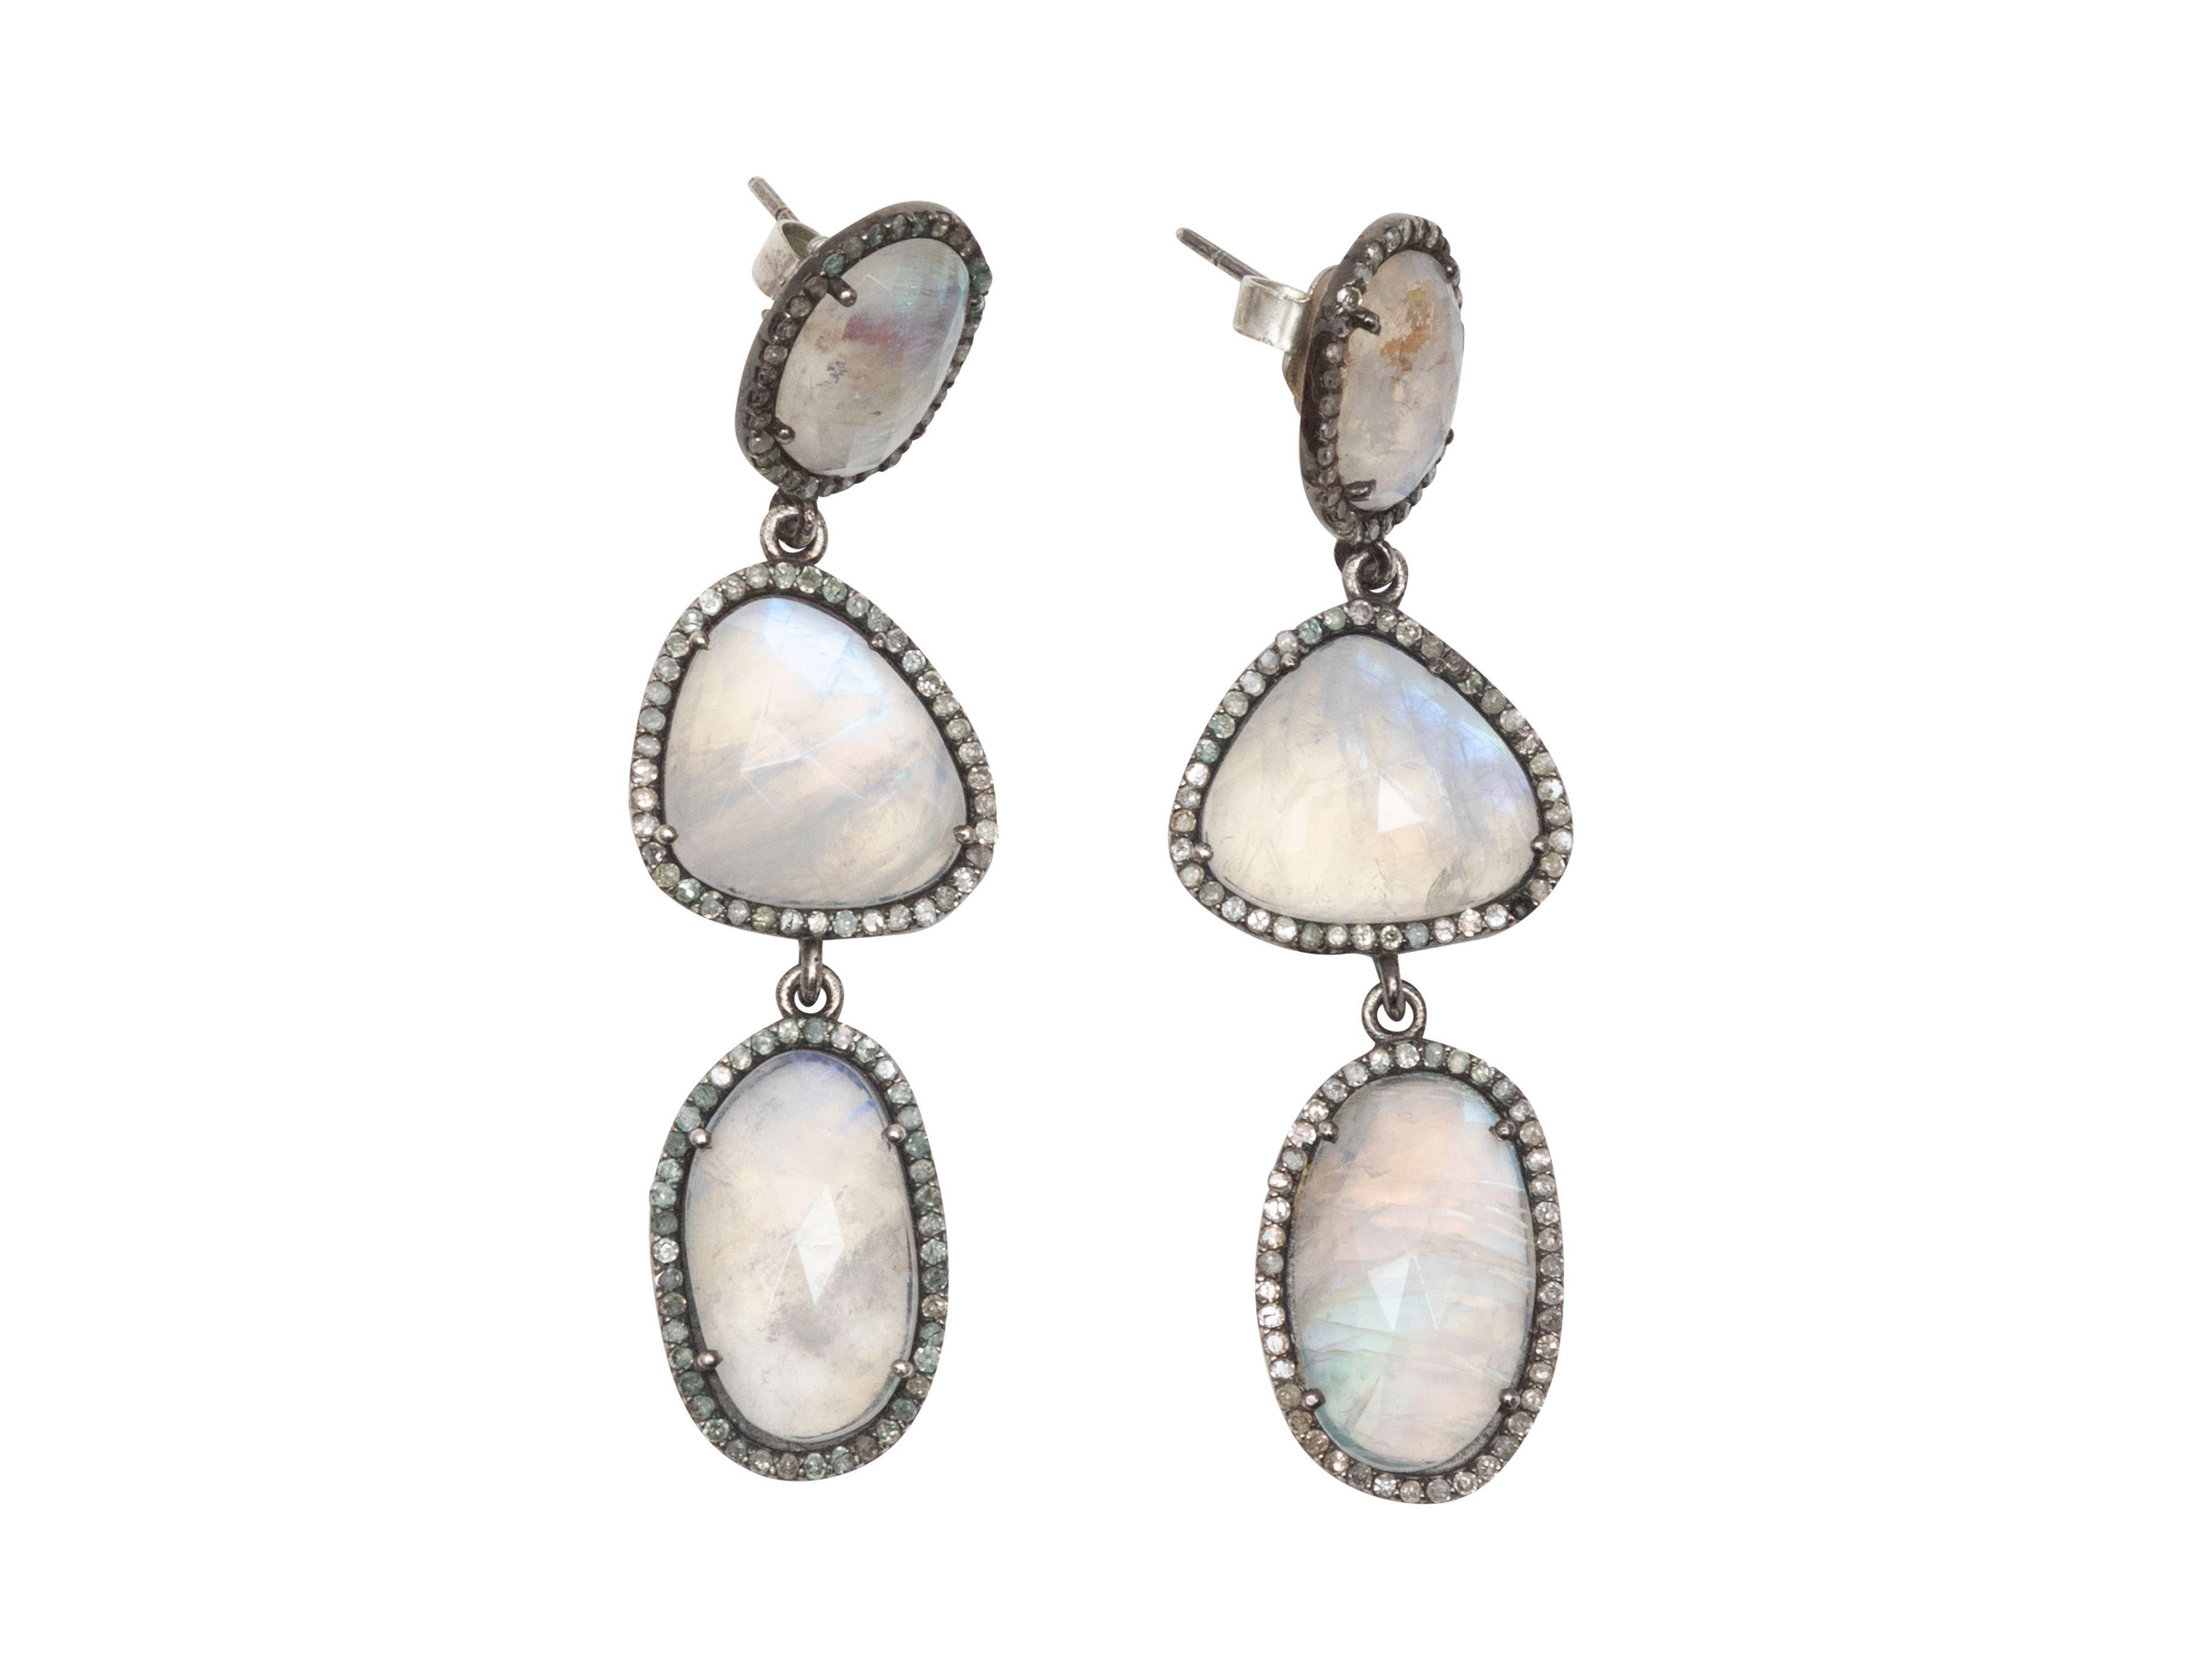 Product Details: Silver and moonstone drop pierced earrings by Jennifer Miller. Pave trim throughout. Butterfly back closures. 2.5